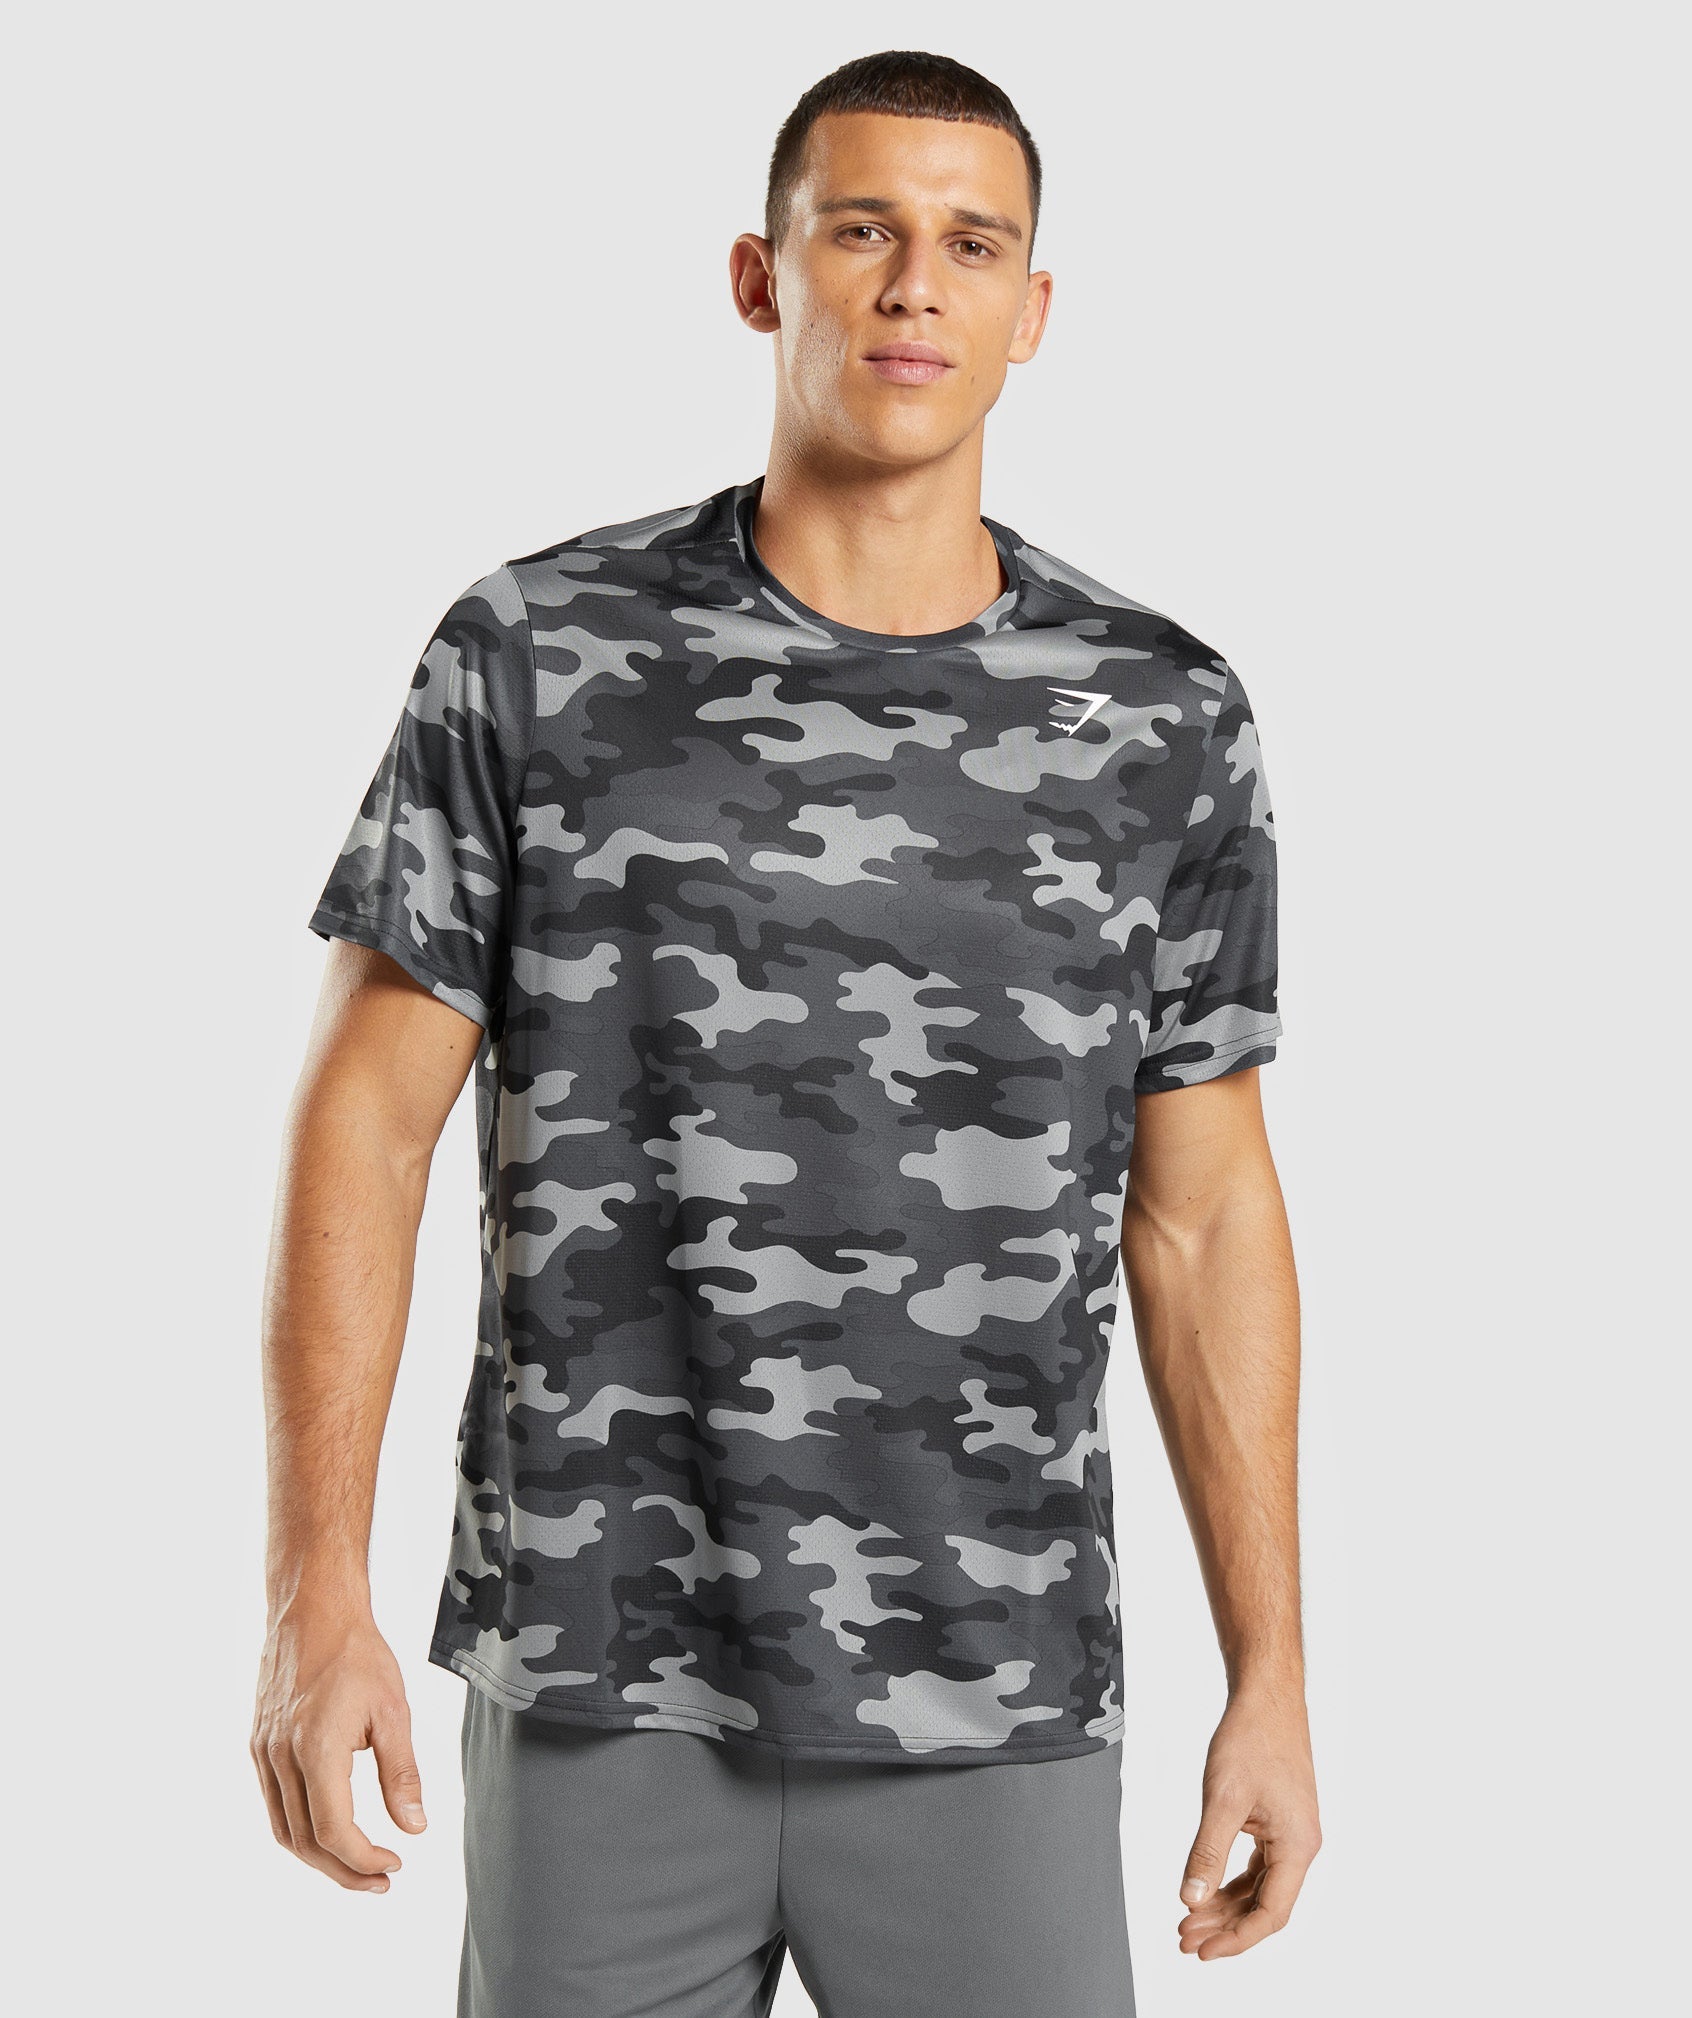 Arrival T-Shirt in Grey Print - view 1